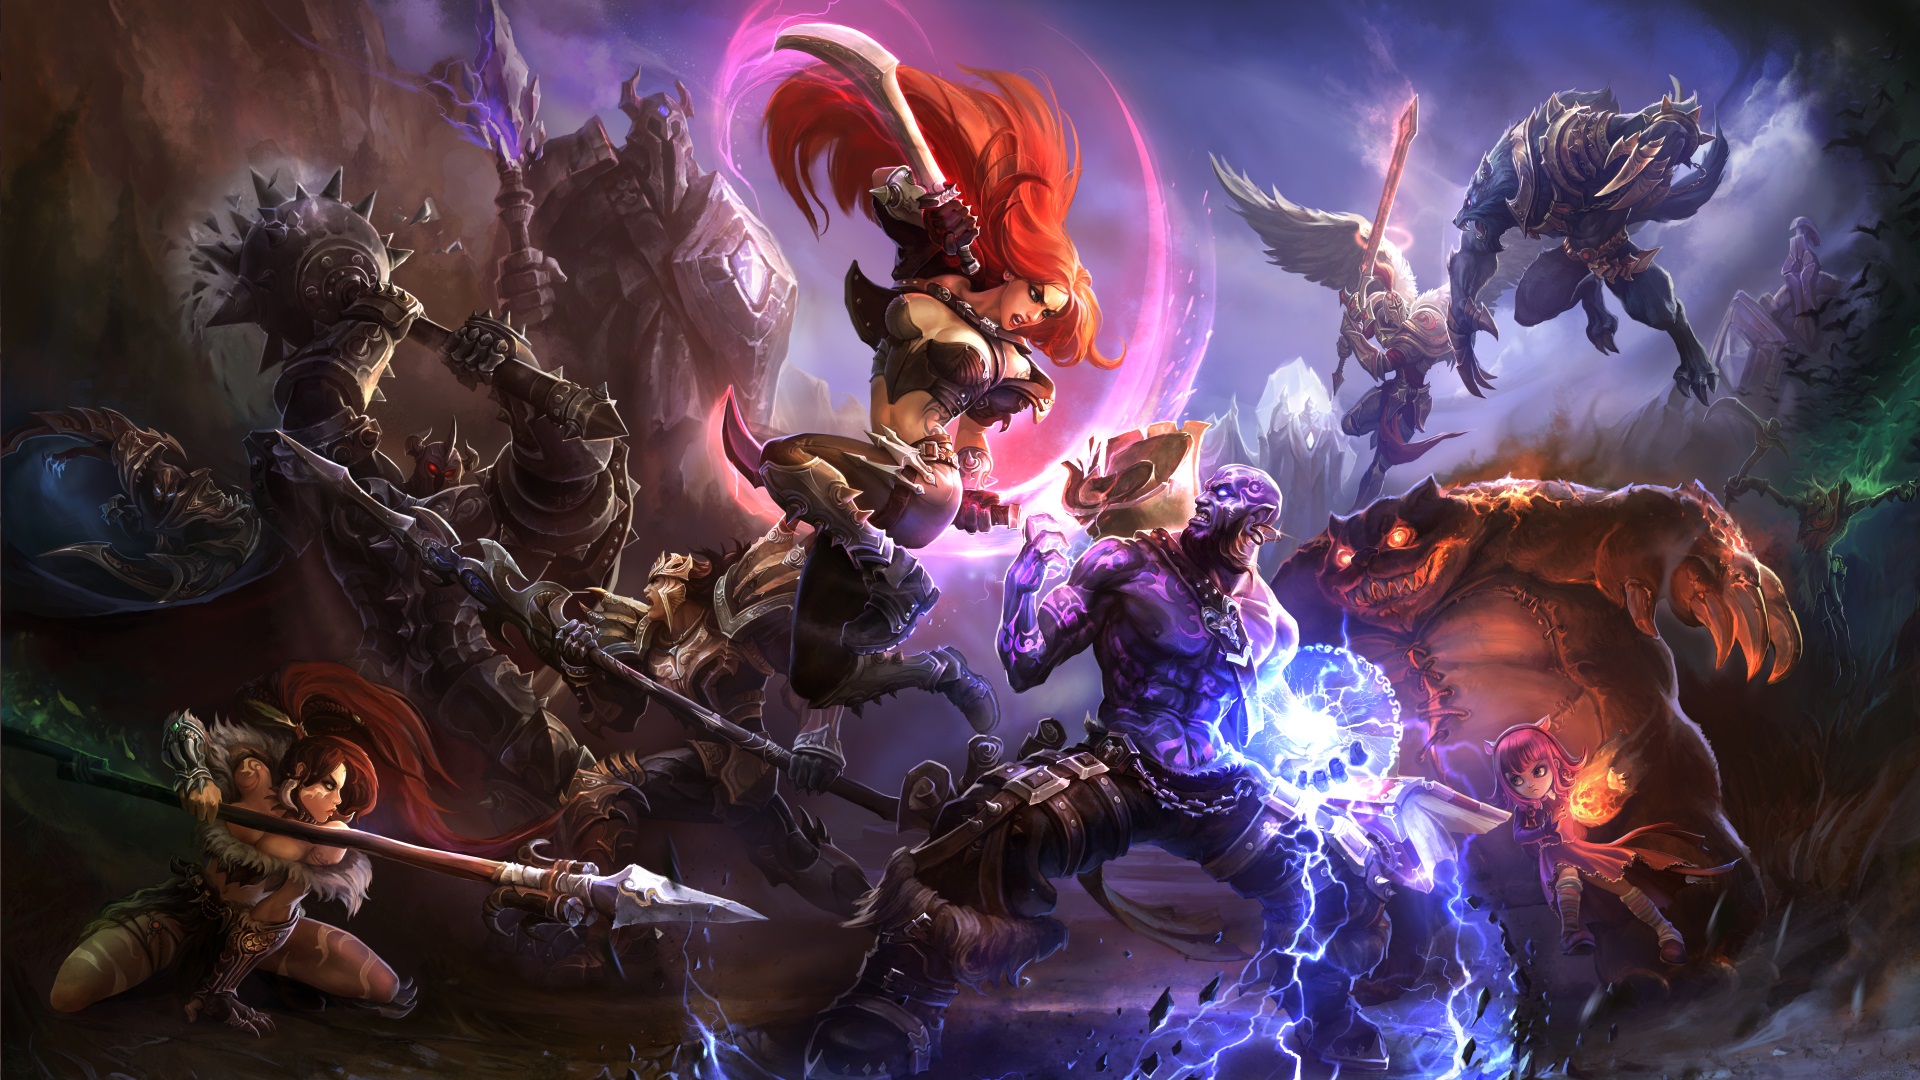 Best MOBA and LOL Mouse - HubPages